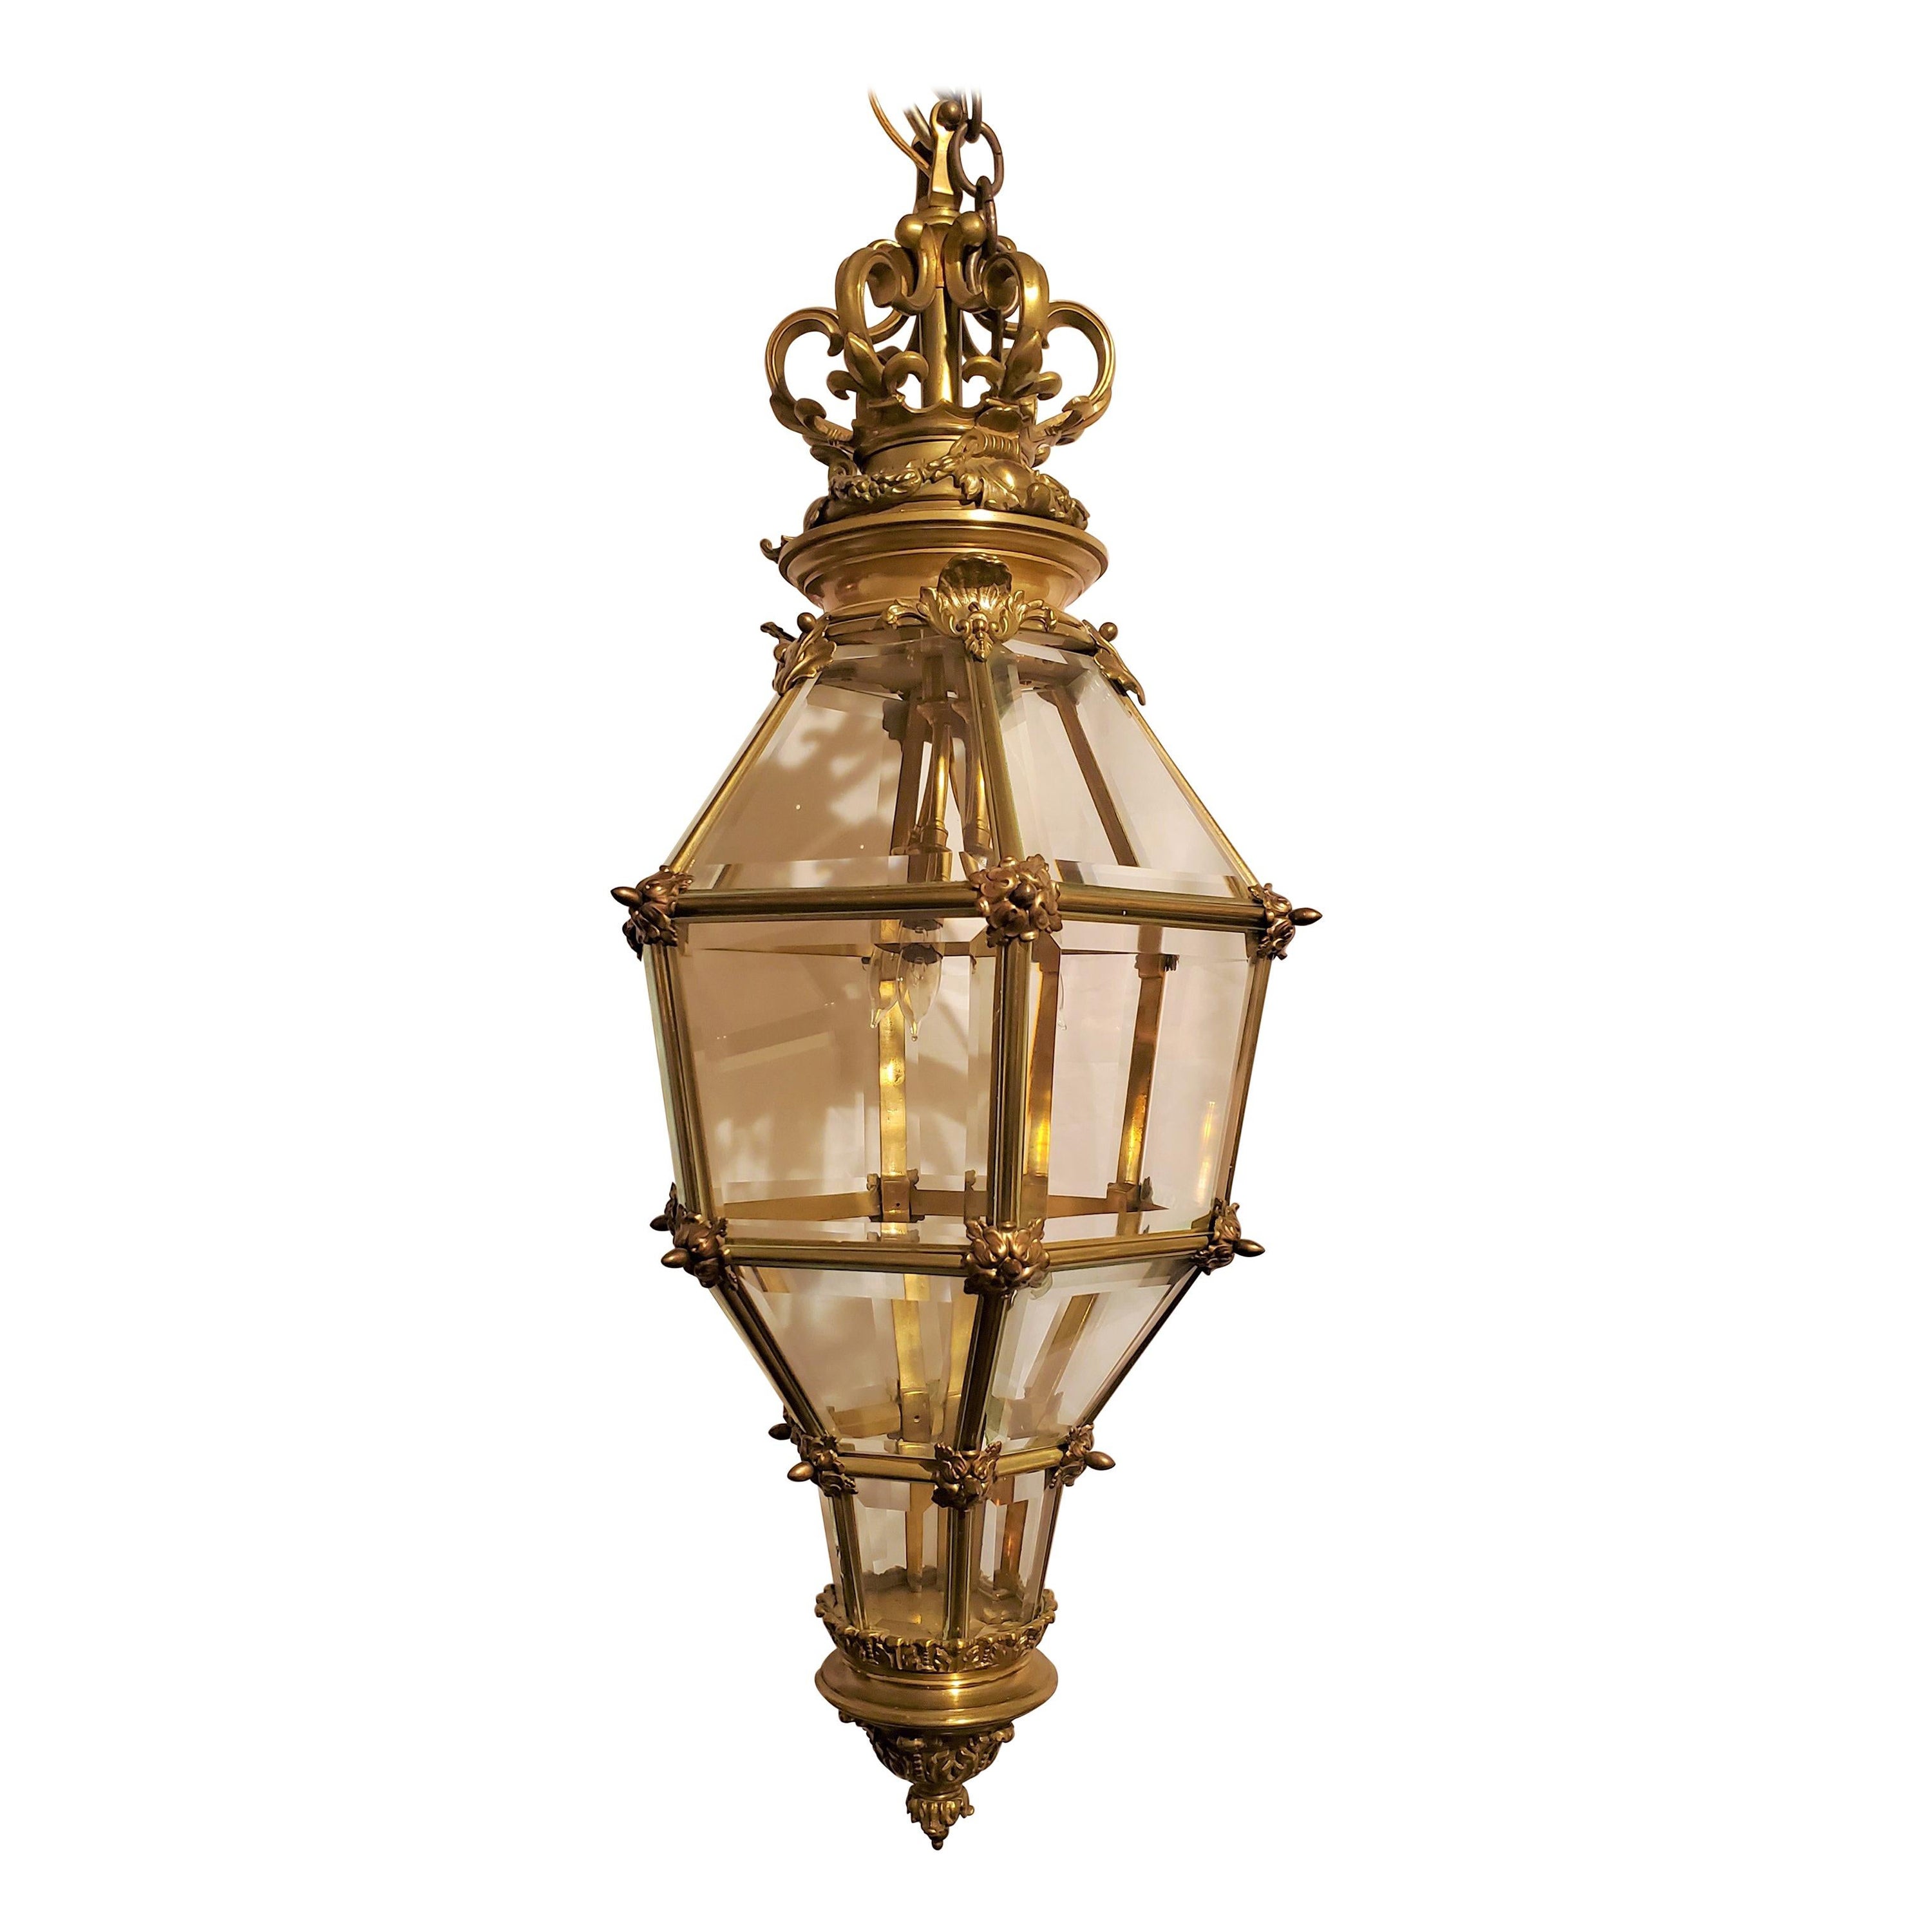 Antique French Bronze and Beveled Glass 3-Light Glass Lantern, circa 1890 For Sale